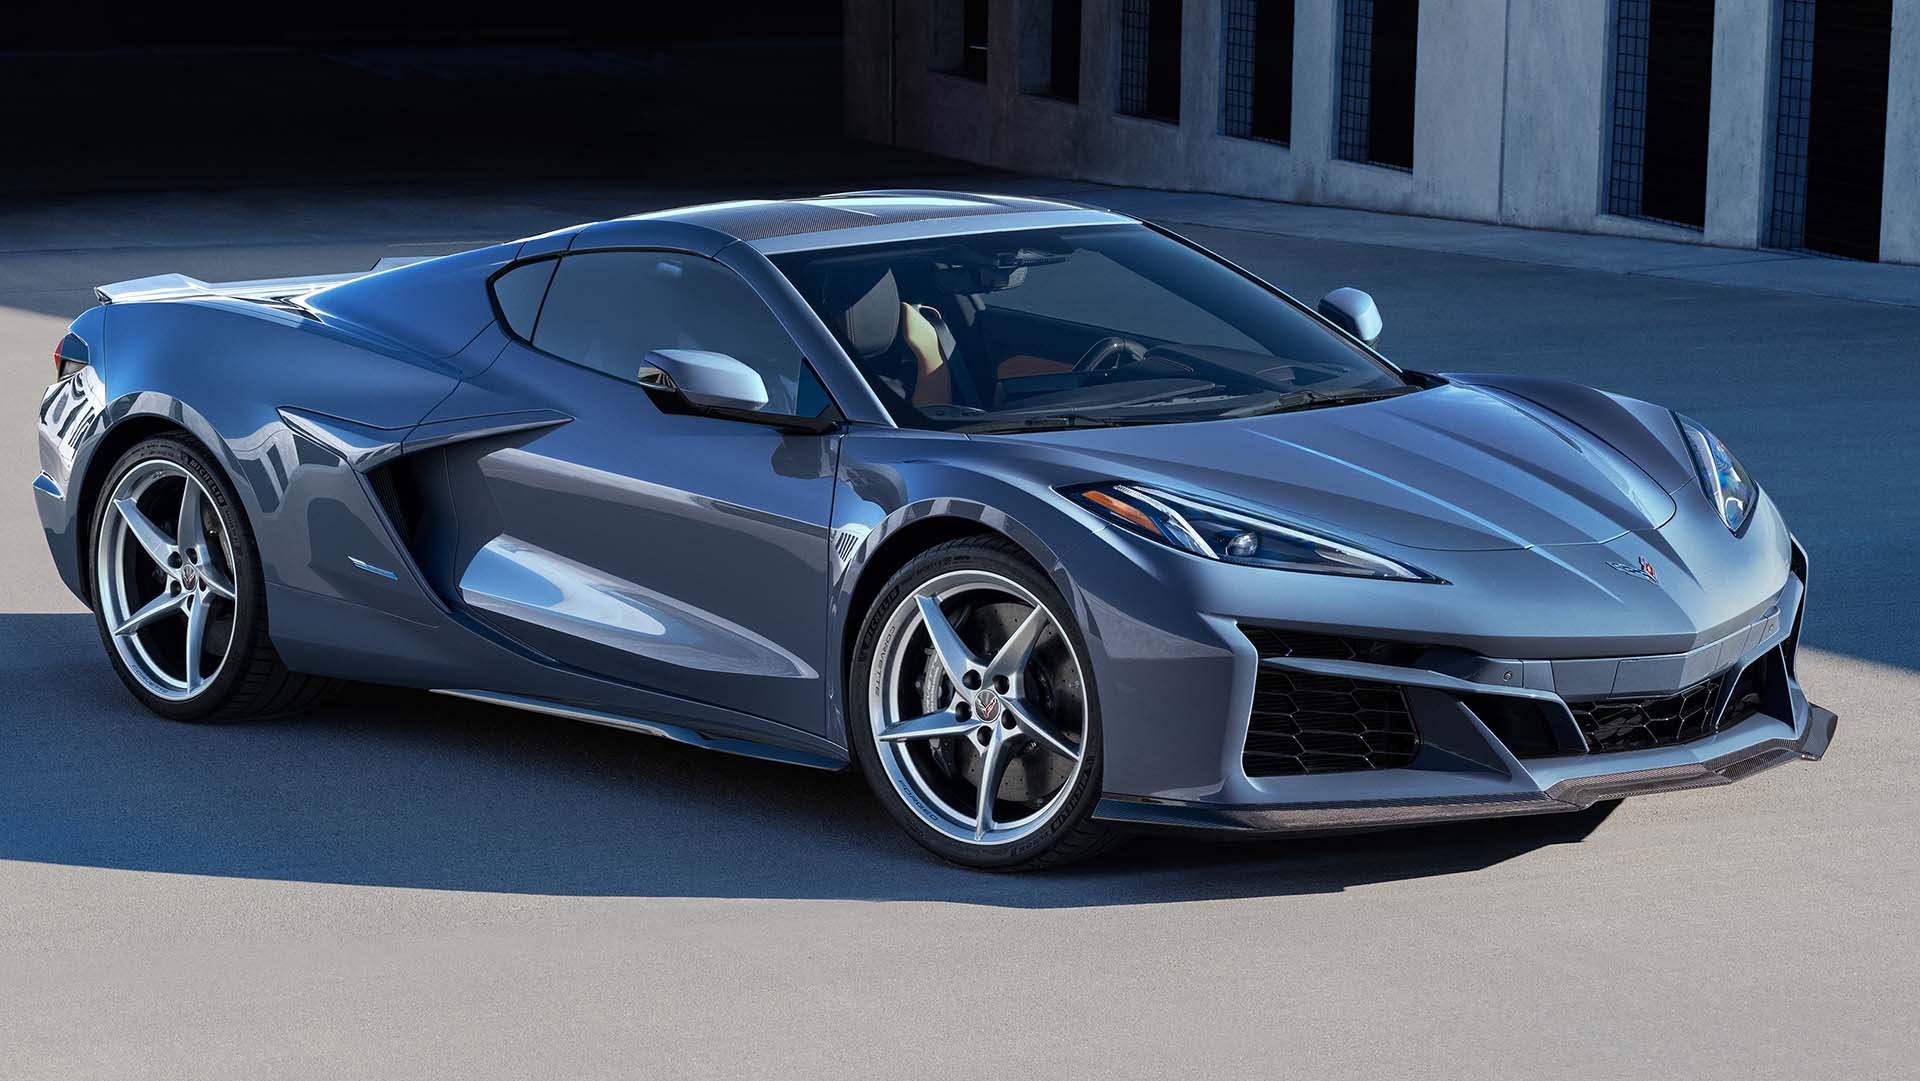 The Debut of the Corvette E-Ray, an Updated Nissan GT-R, and the all-new Mazda CX-90